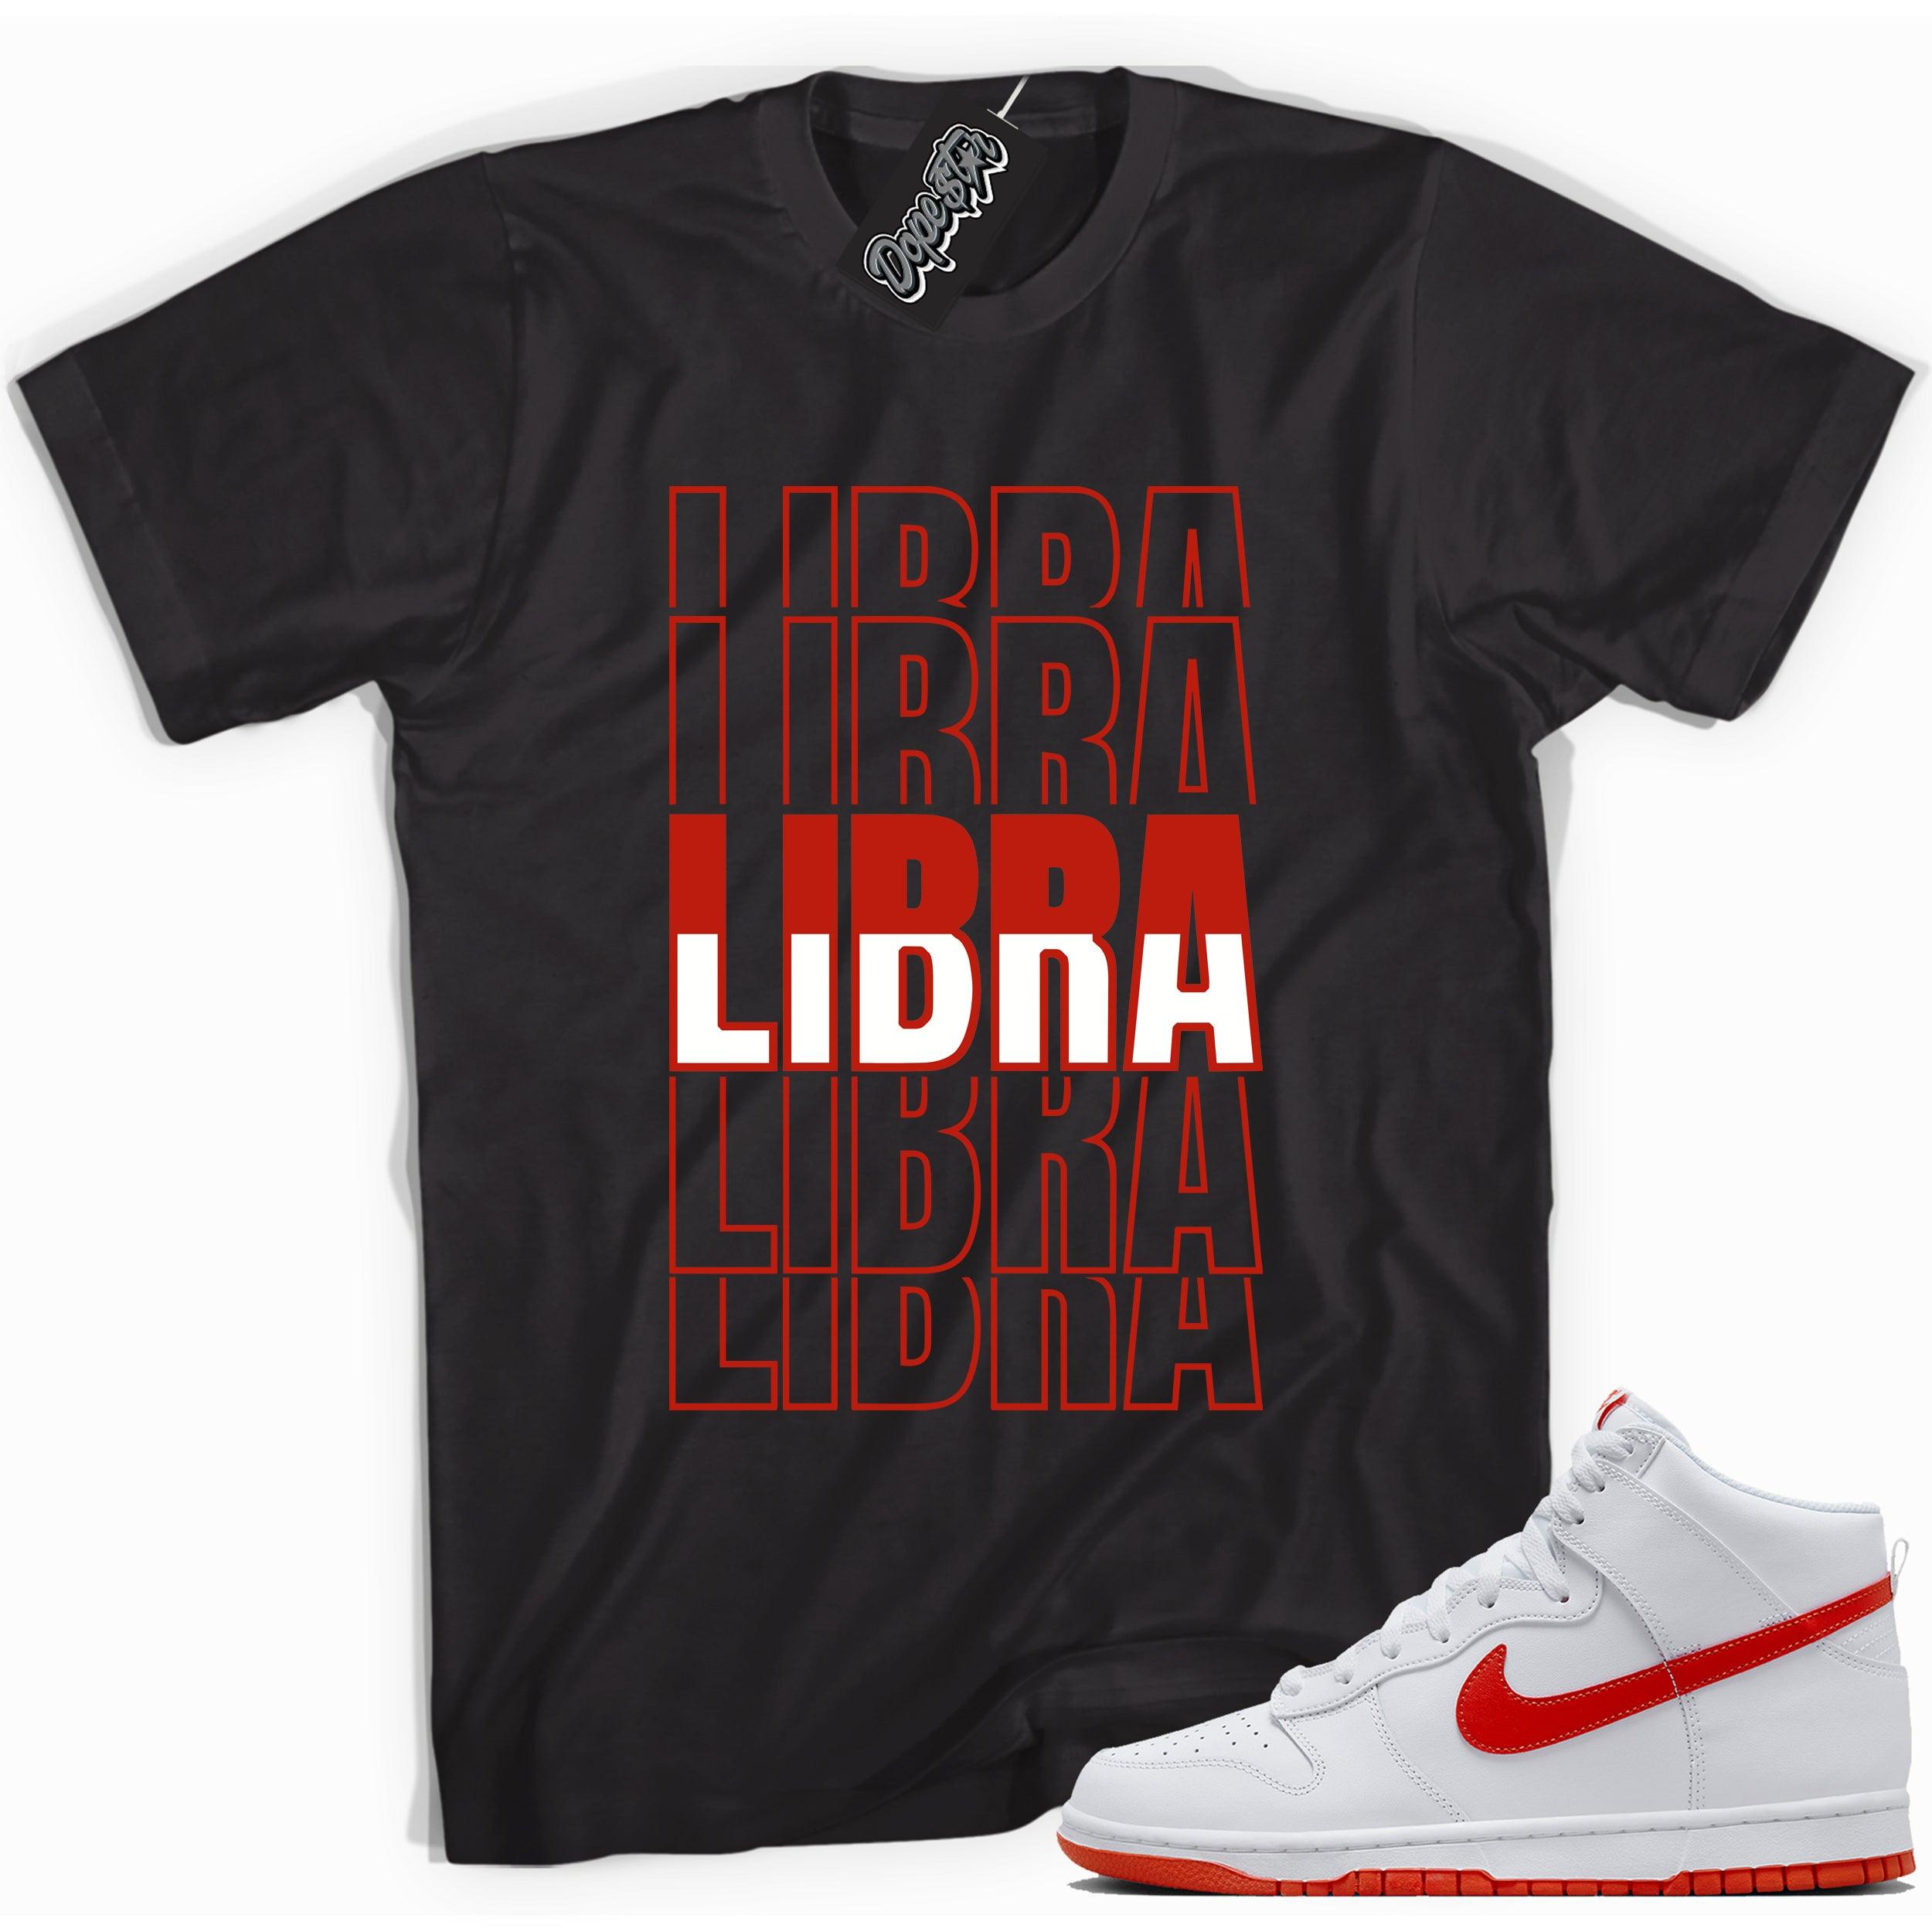 Cool black graphic tee with 'libra' print, that perfectly matches Nike Dunk High White Picante Red sneakers.